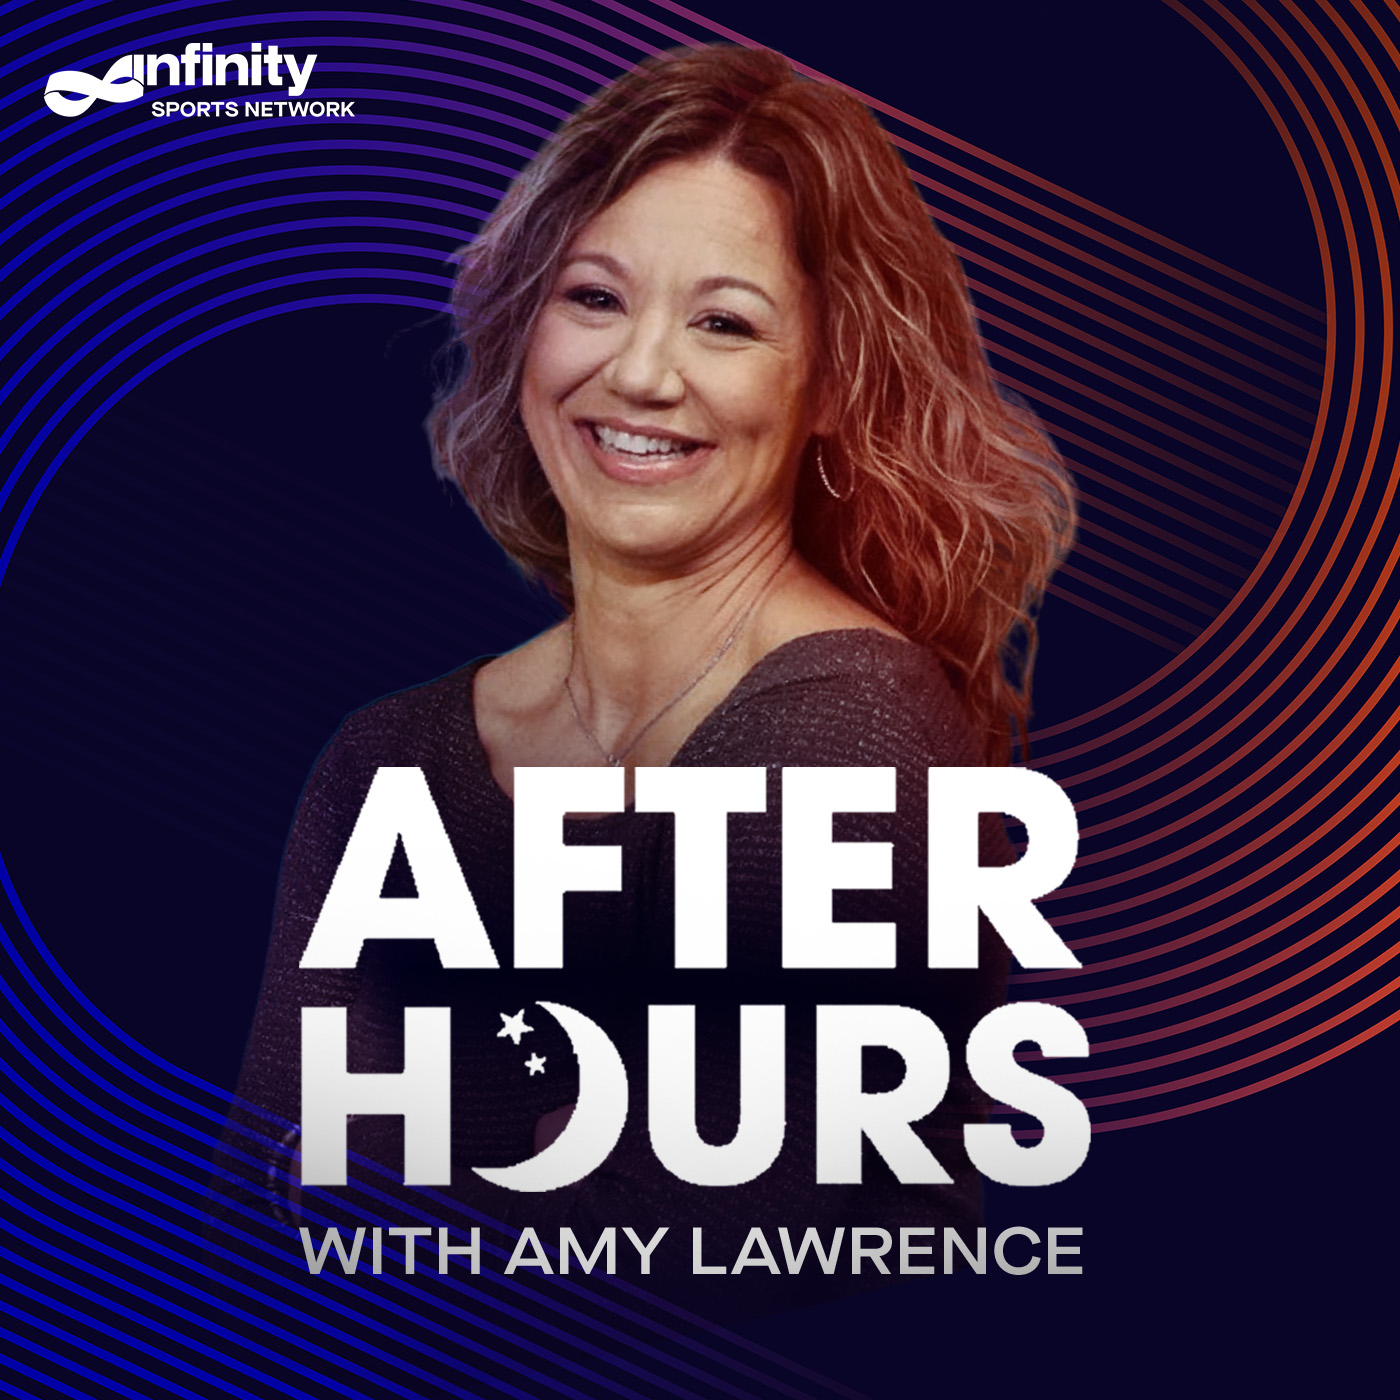 9-7-21 After Hours with Amy Lawrence PODCAST: Hour 4